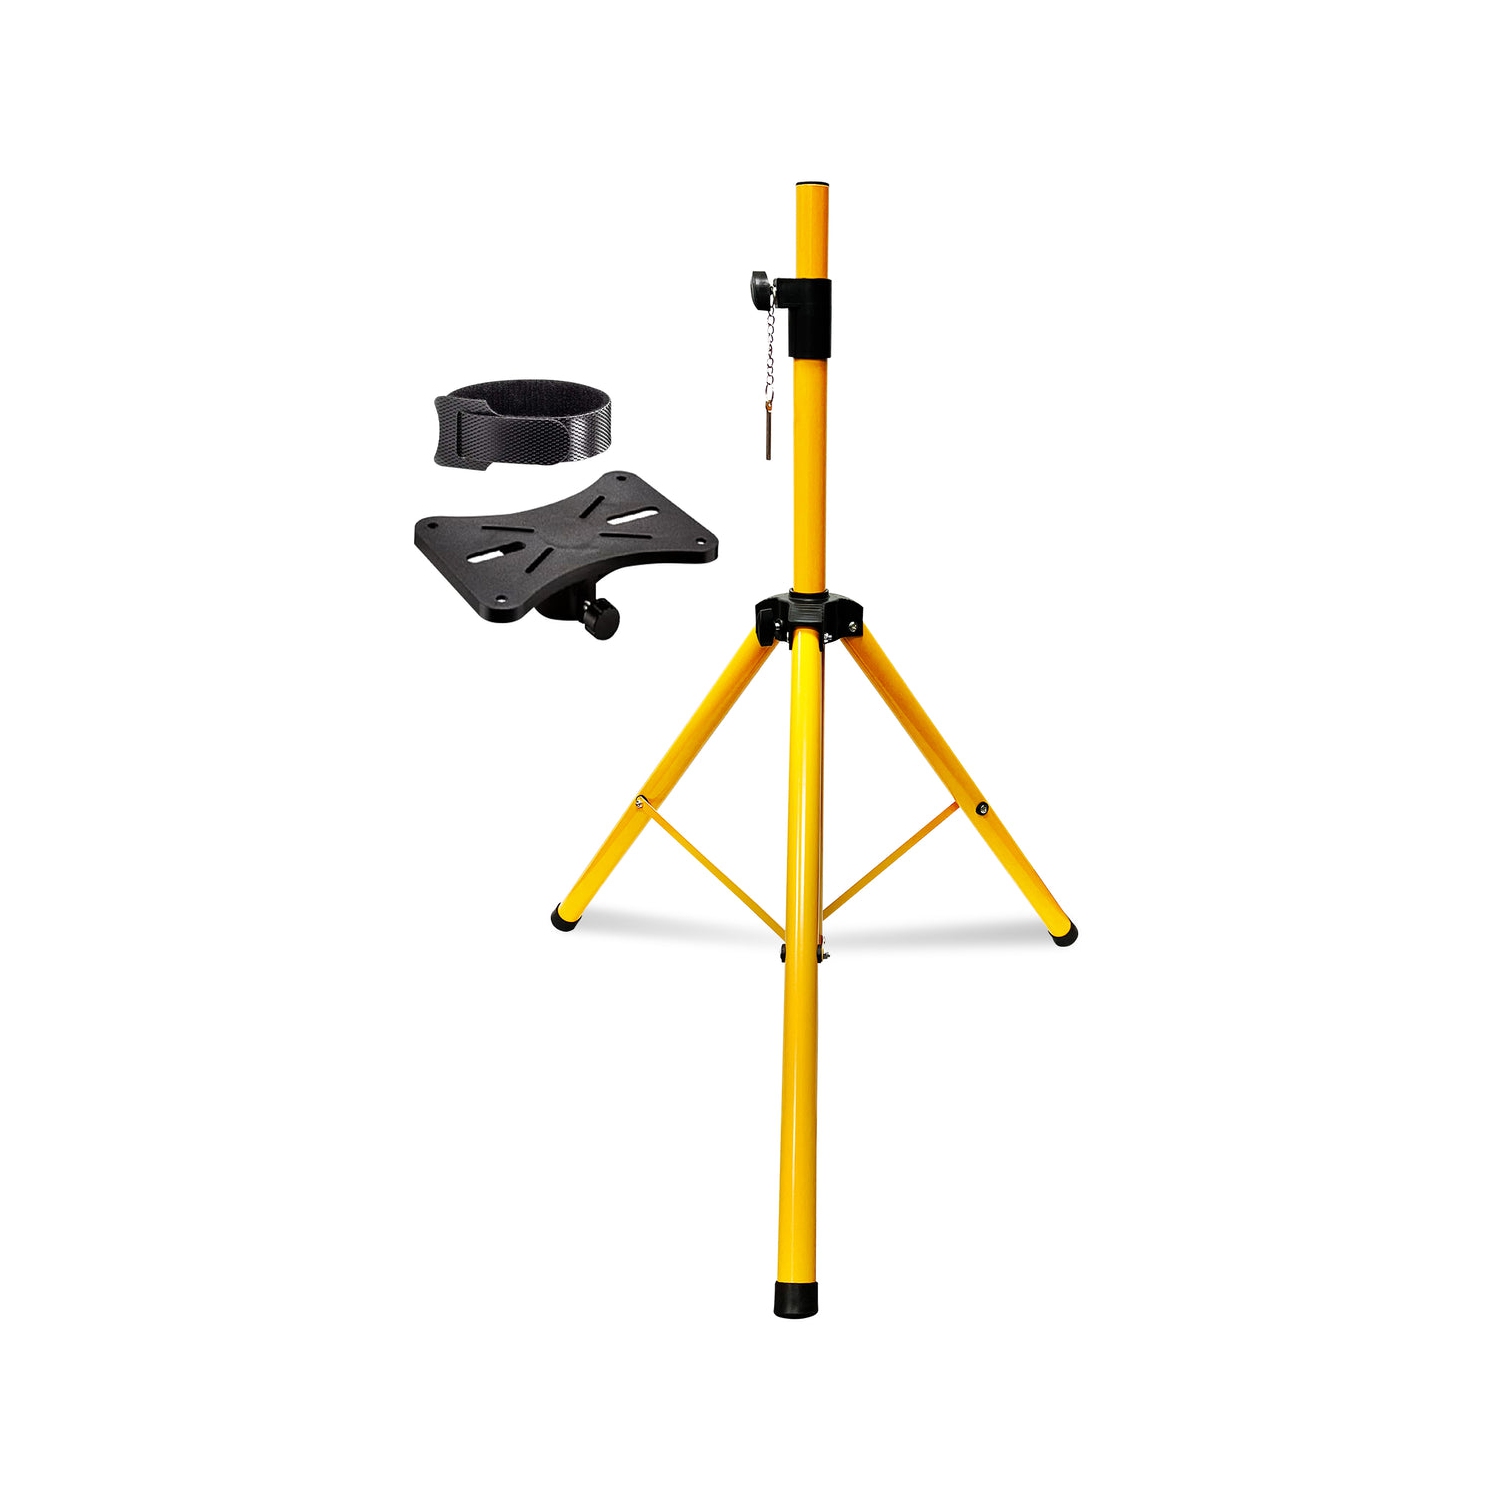 5 Core Speakers Stands 1 Piece Yellow Height Adjustable Tripod PA Monitor Holder for Large Speakers DJ Stand Para Bocinas - SS ECO 1PK YLW WoB